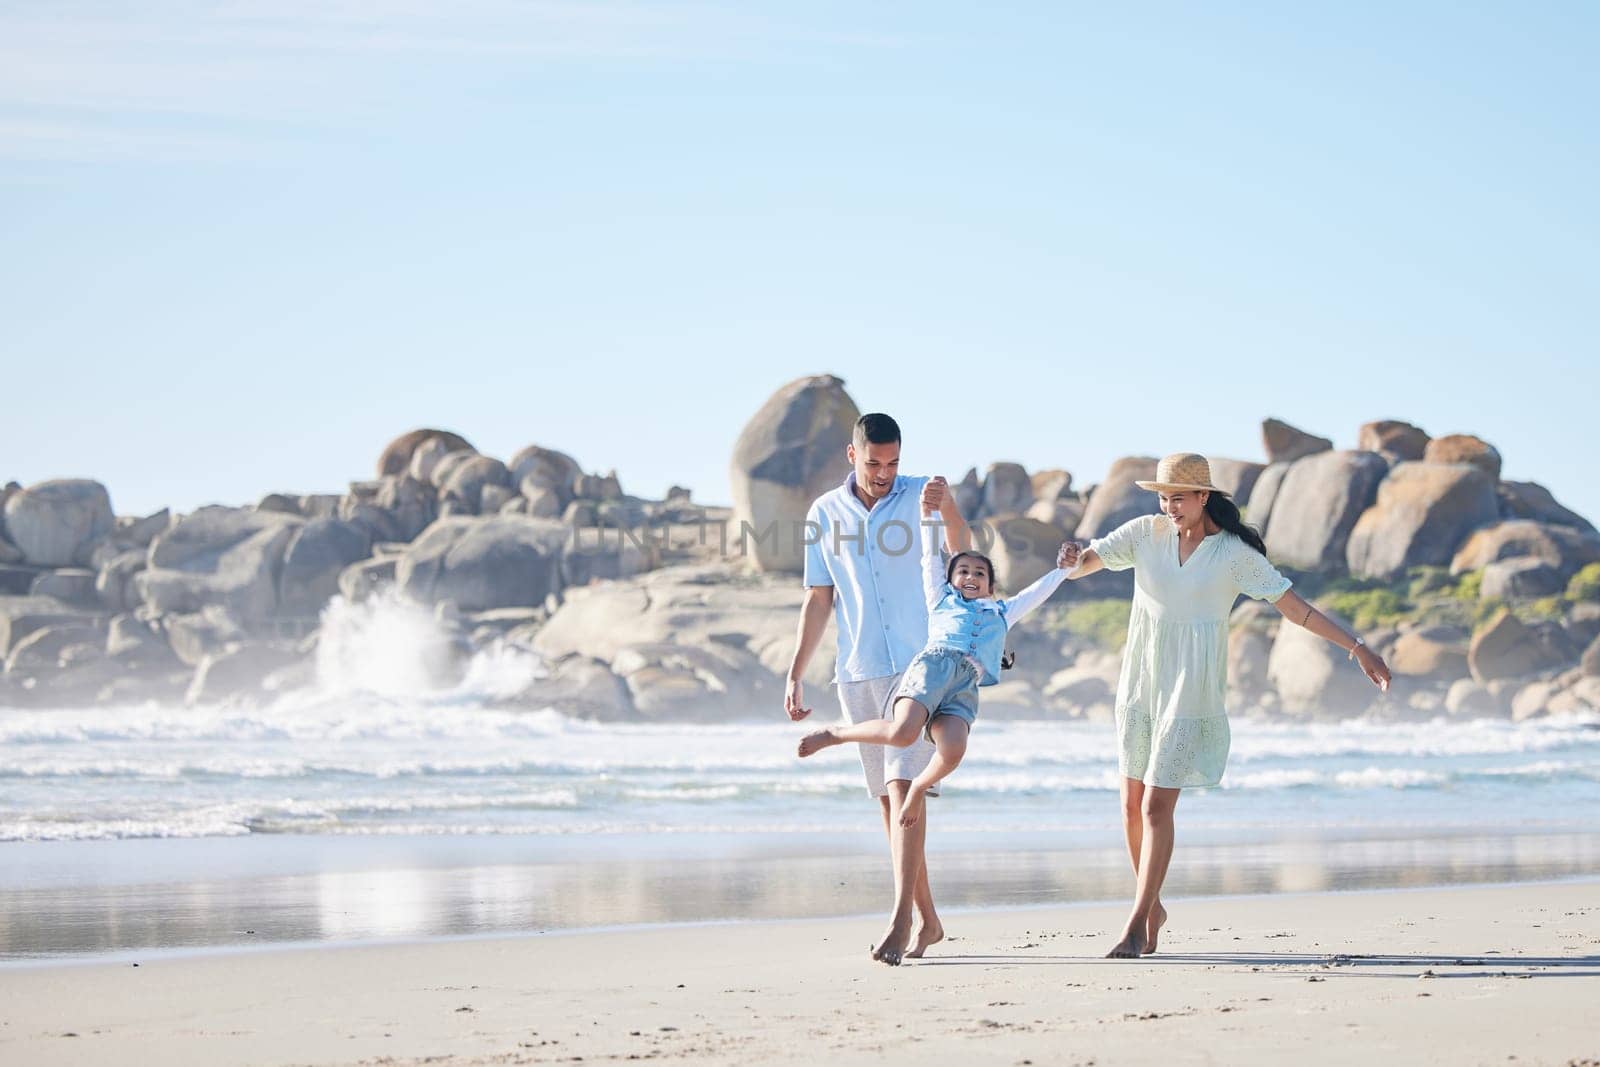 Family, parents and swinging a child at the beach for fun, adventure and play on holiday. A happy woman, man and young kid walking on sand and holding hands on vacation at ocean, nature or outdoor.